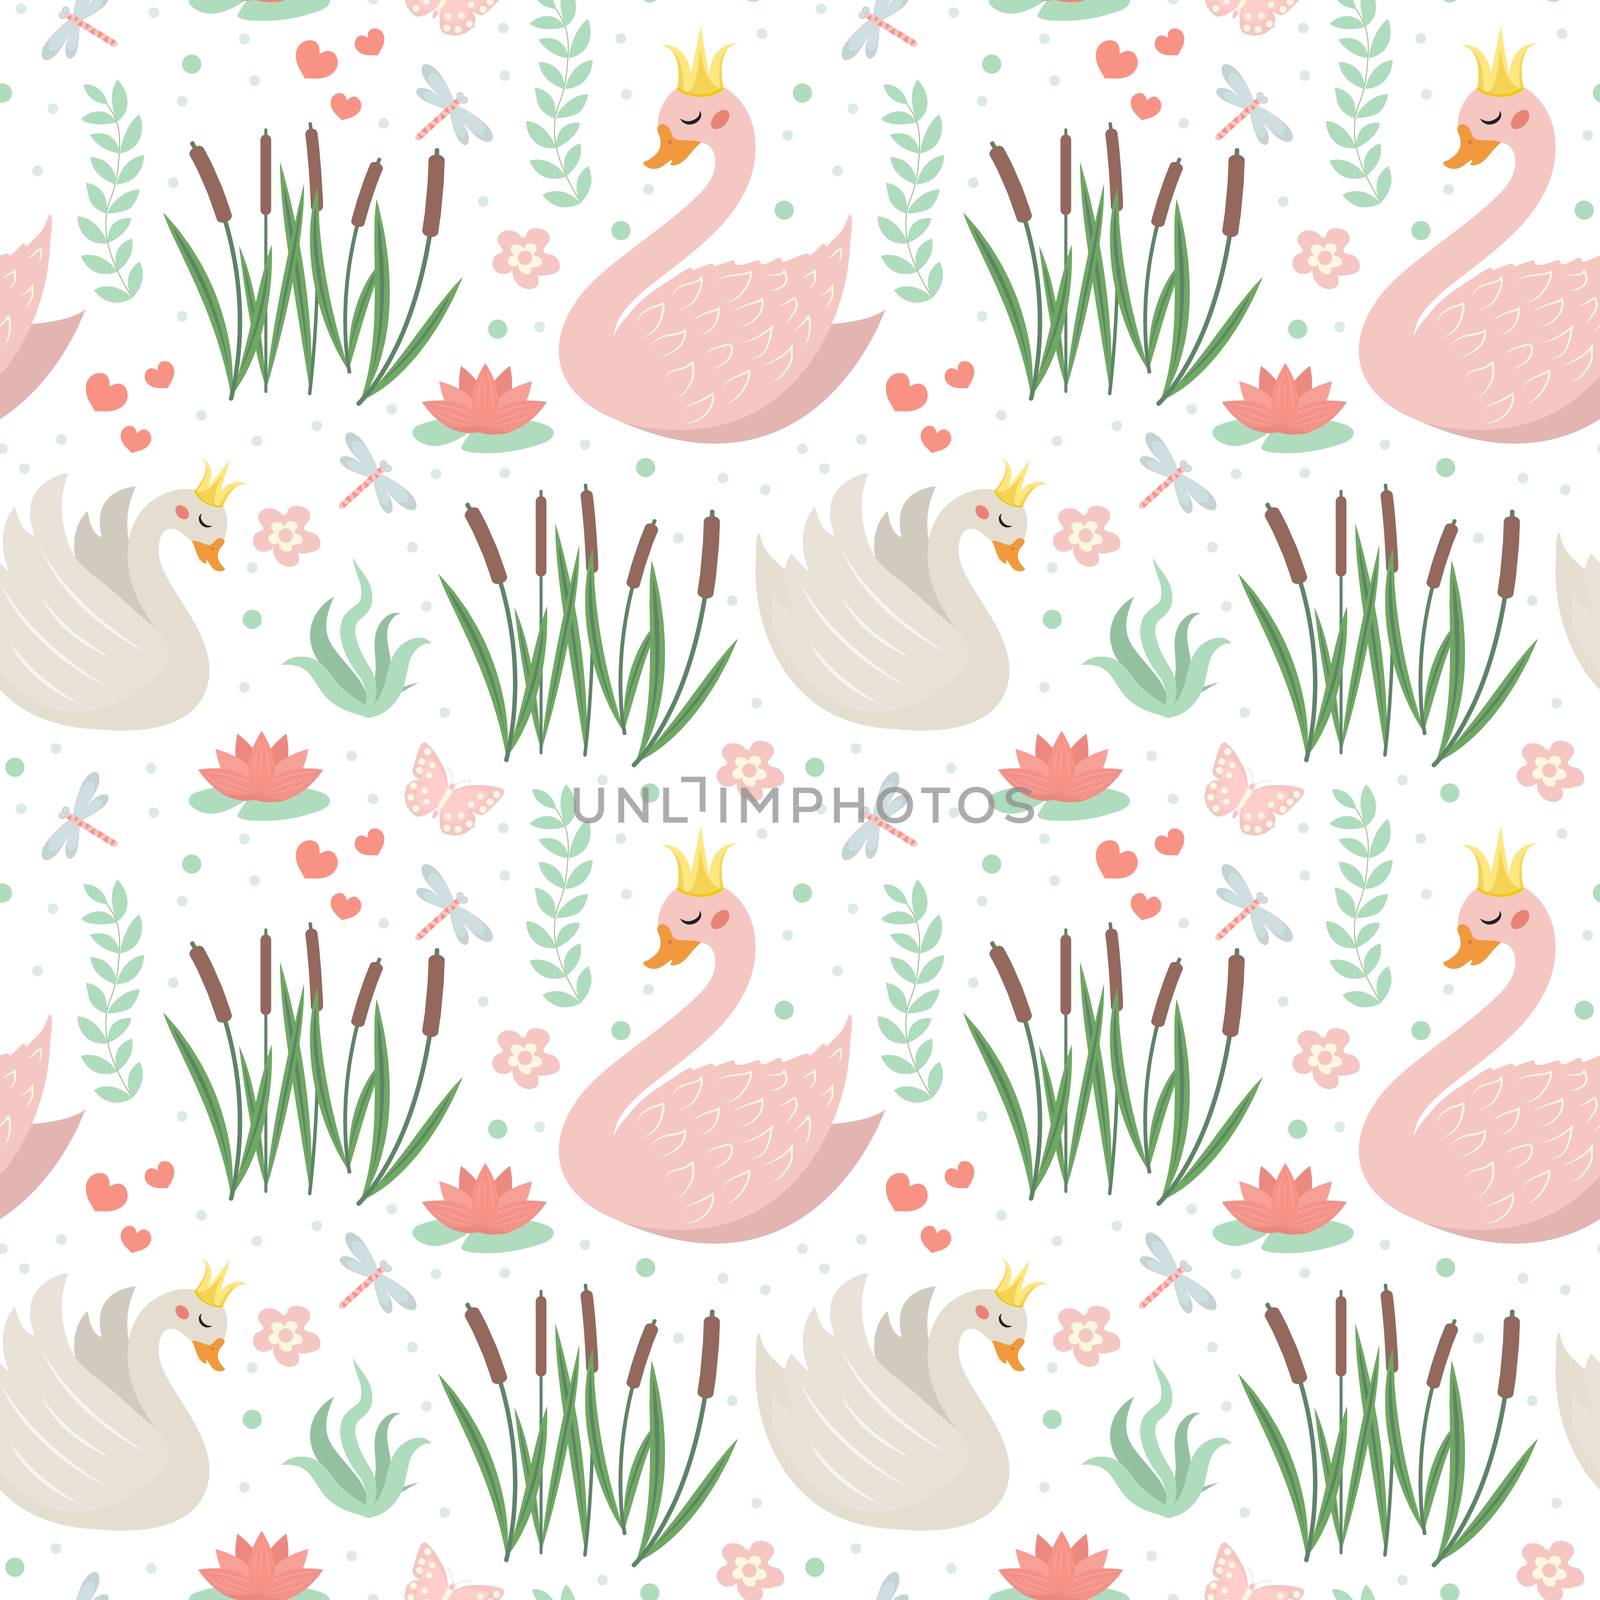 Swans cute seamless pattern. Modern princess swan repetitive texture. Holiday endless background, backdrop. illustration